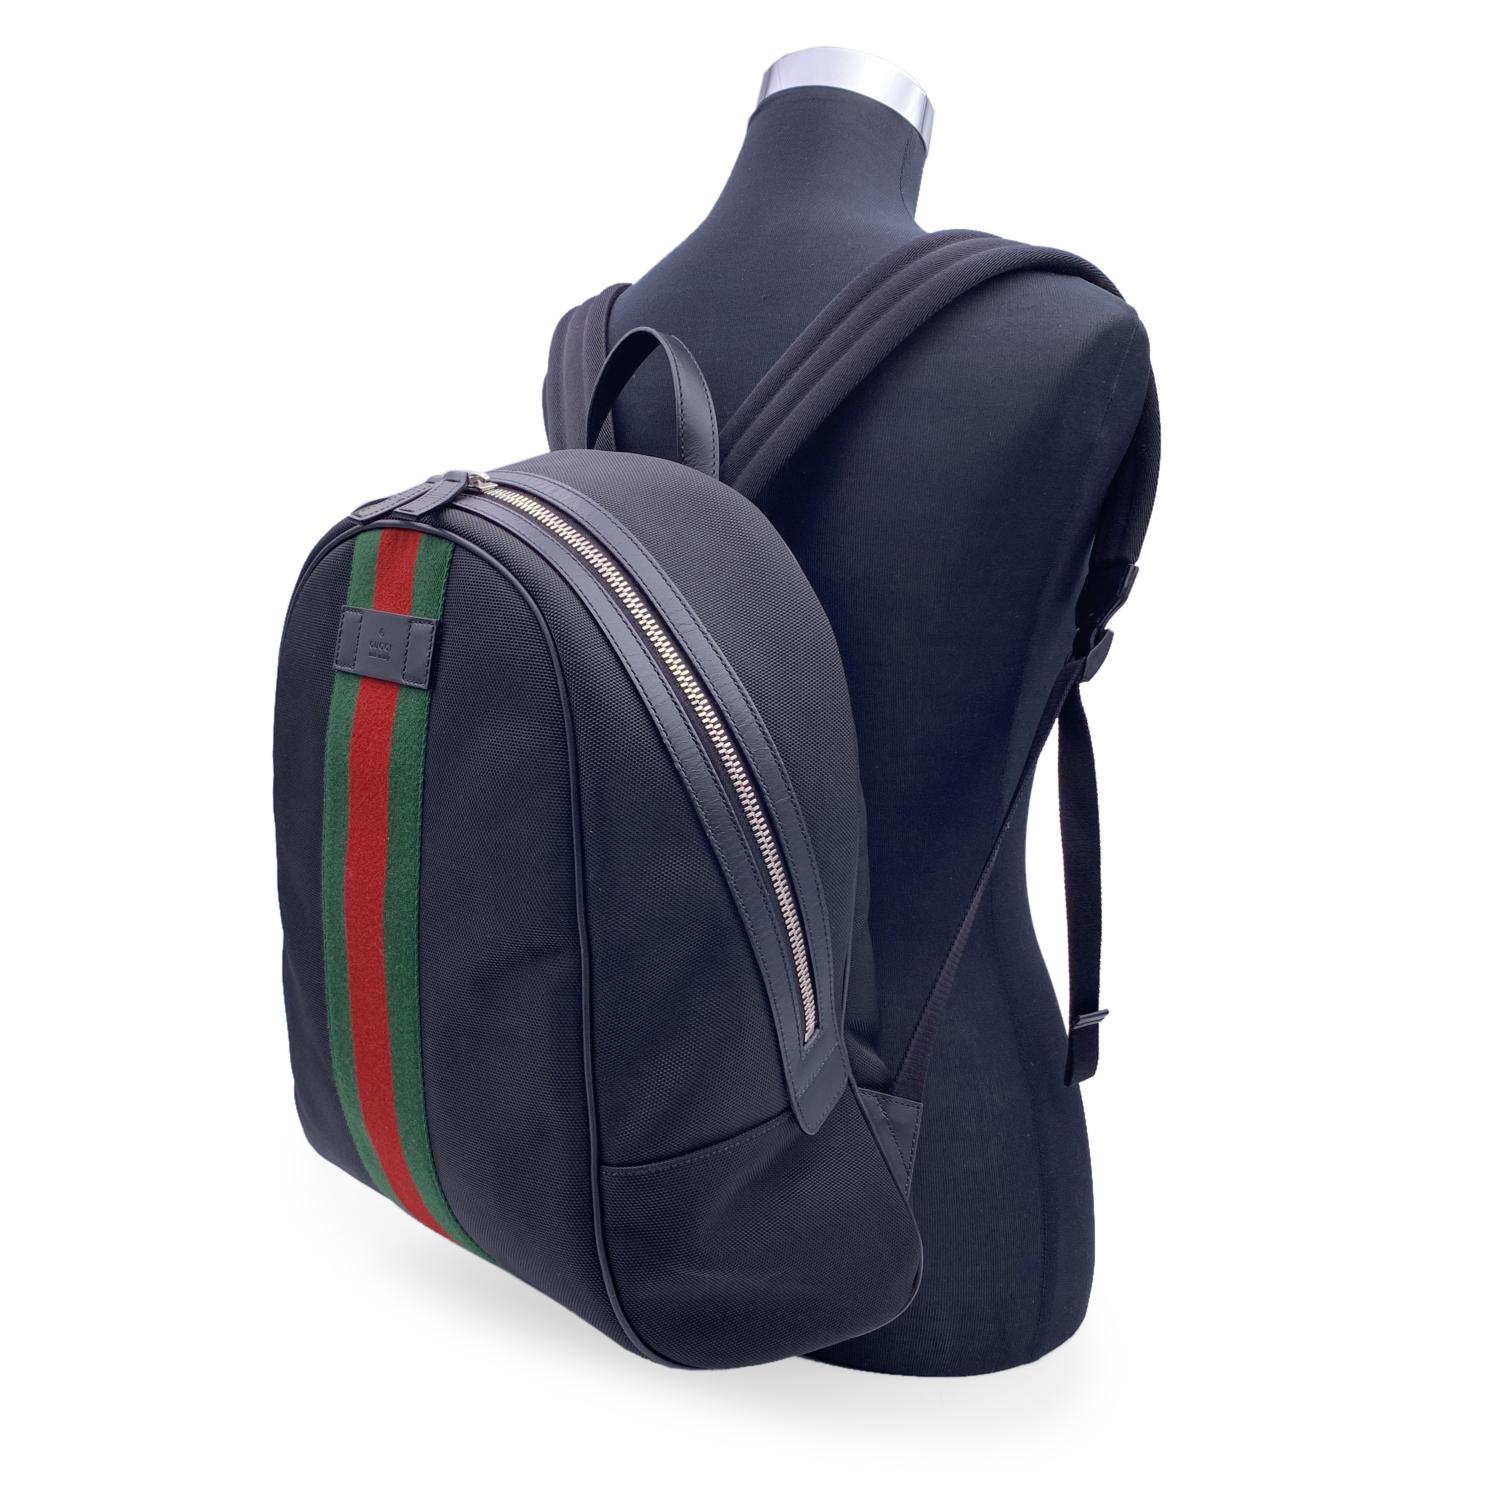 Unisex Backpack by Gucci, crafted in durable black techno canvas. It features green/red/green stripes on th front. Upper zipper closure. 1 side zipper pocket inside. Adjustable backstraps. 'GUCCI - Made in Italy' tag (with serial number on its